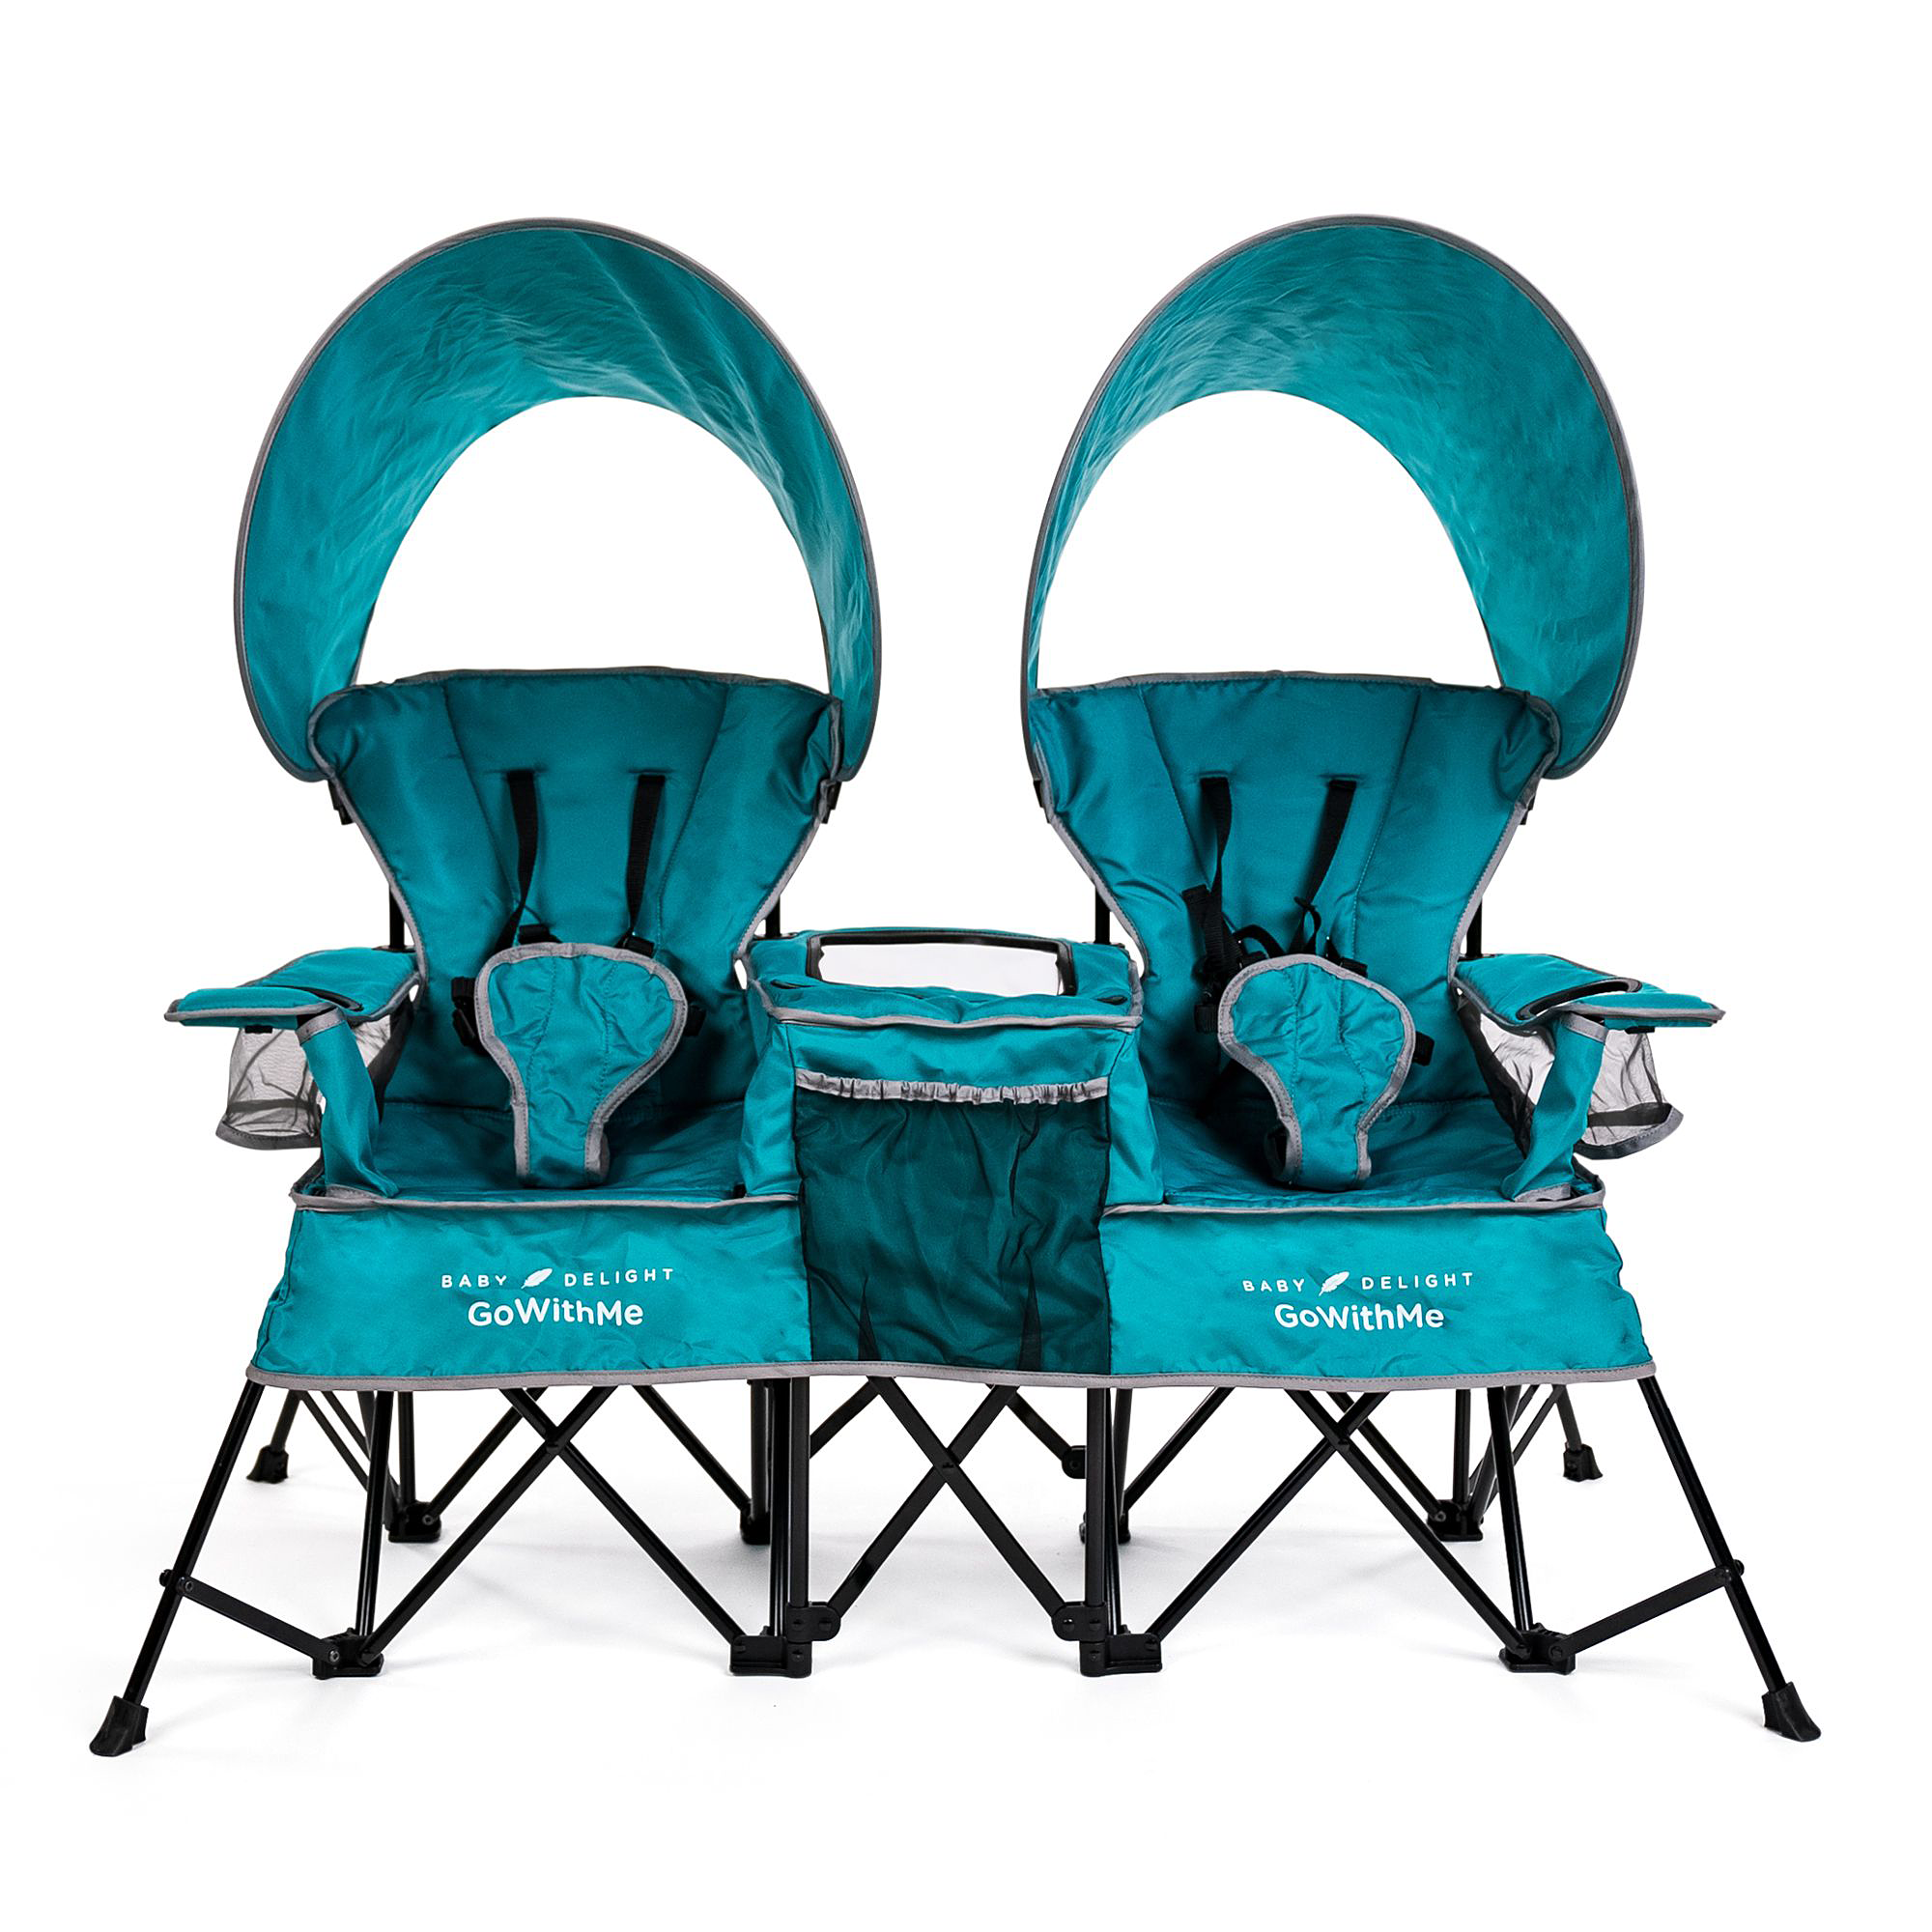 Baby Delight Go With Me Duo Deluxe Portable Double Chair for Kids